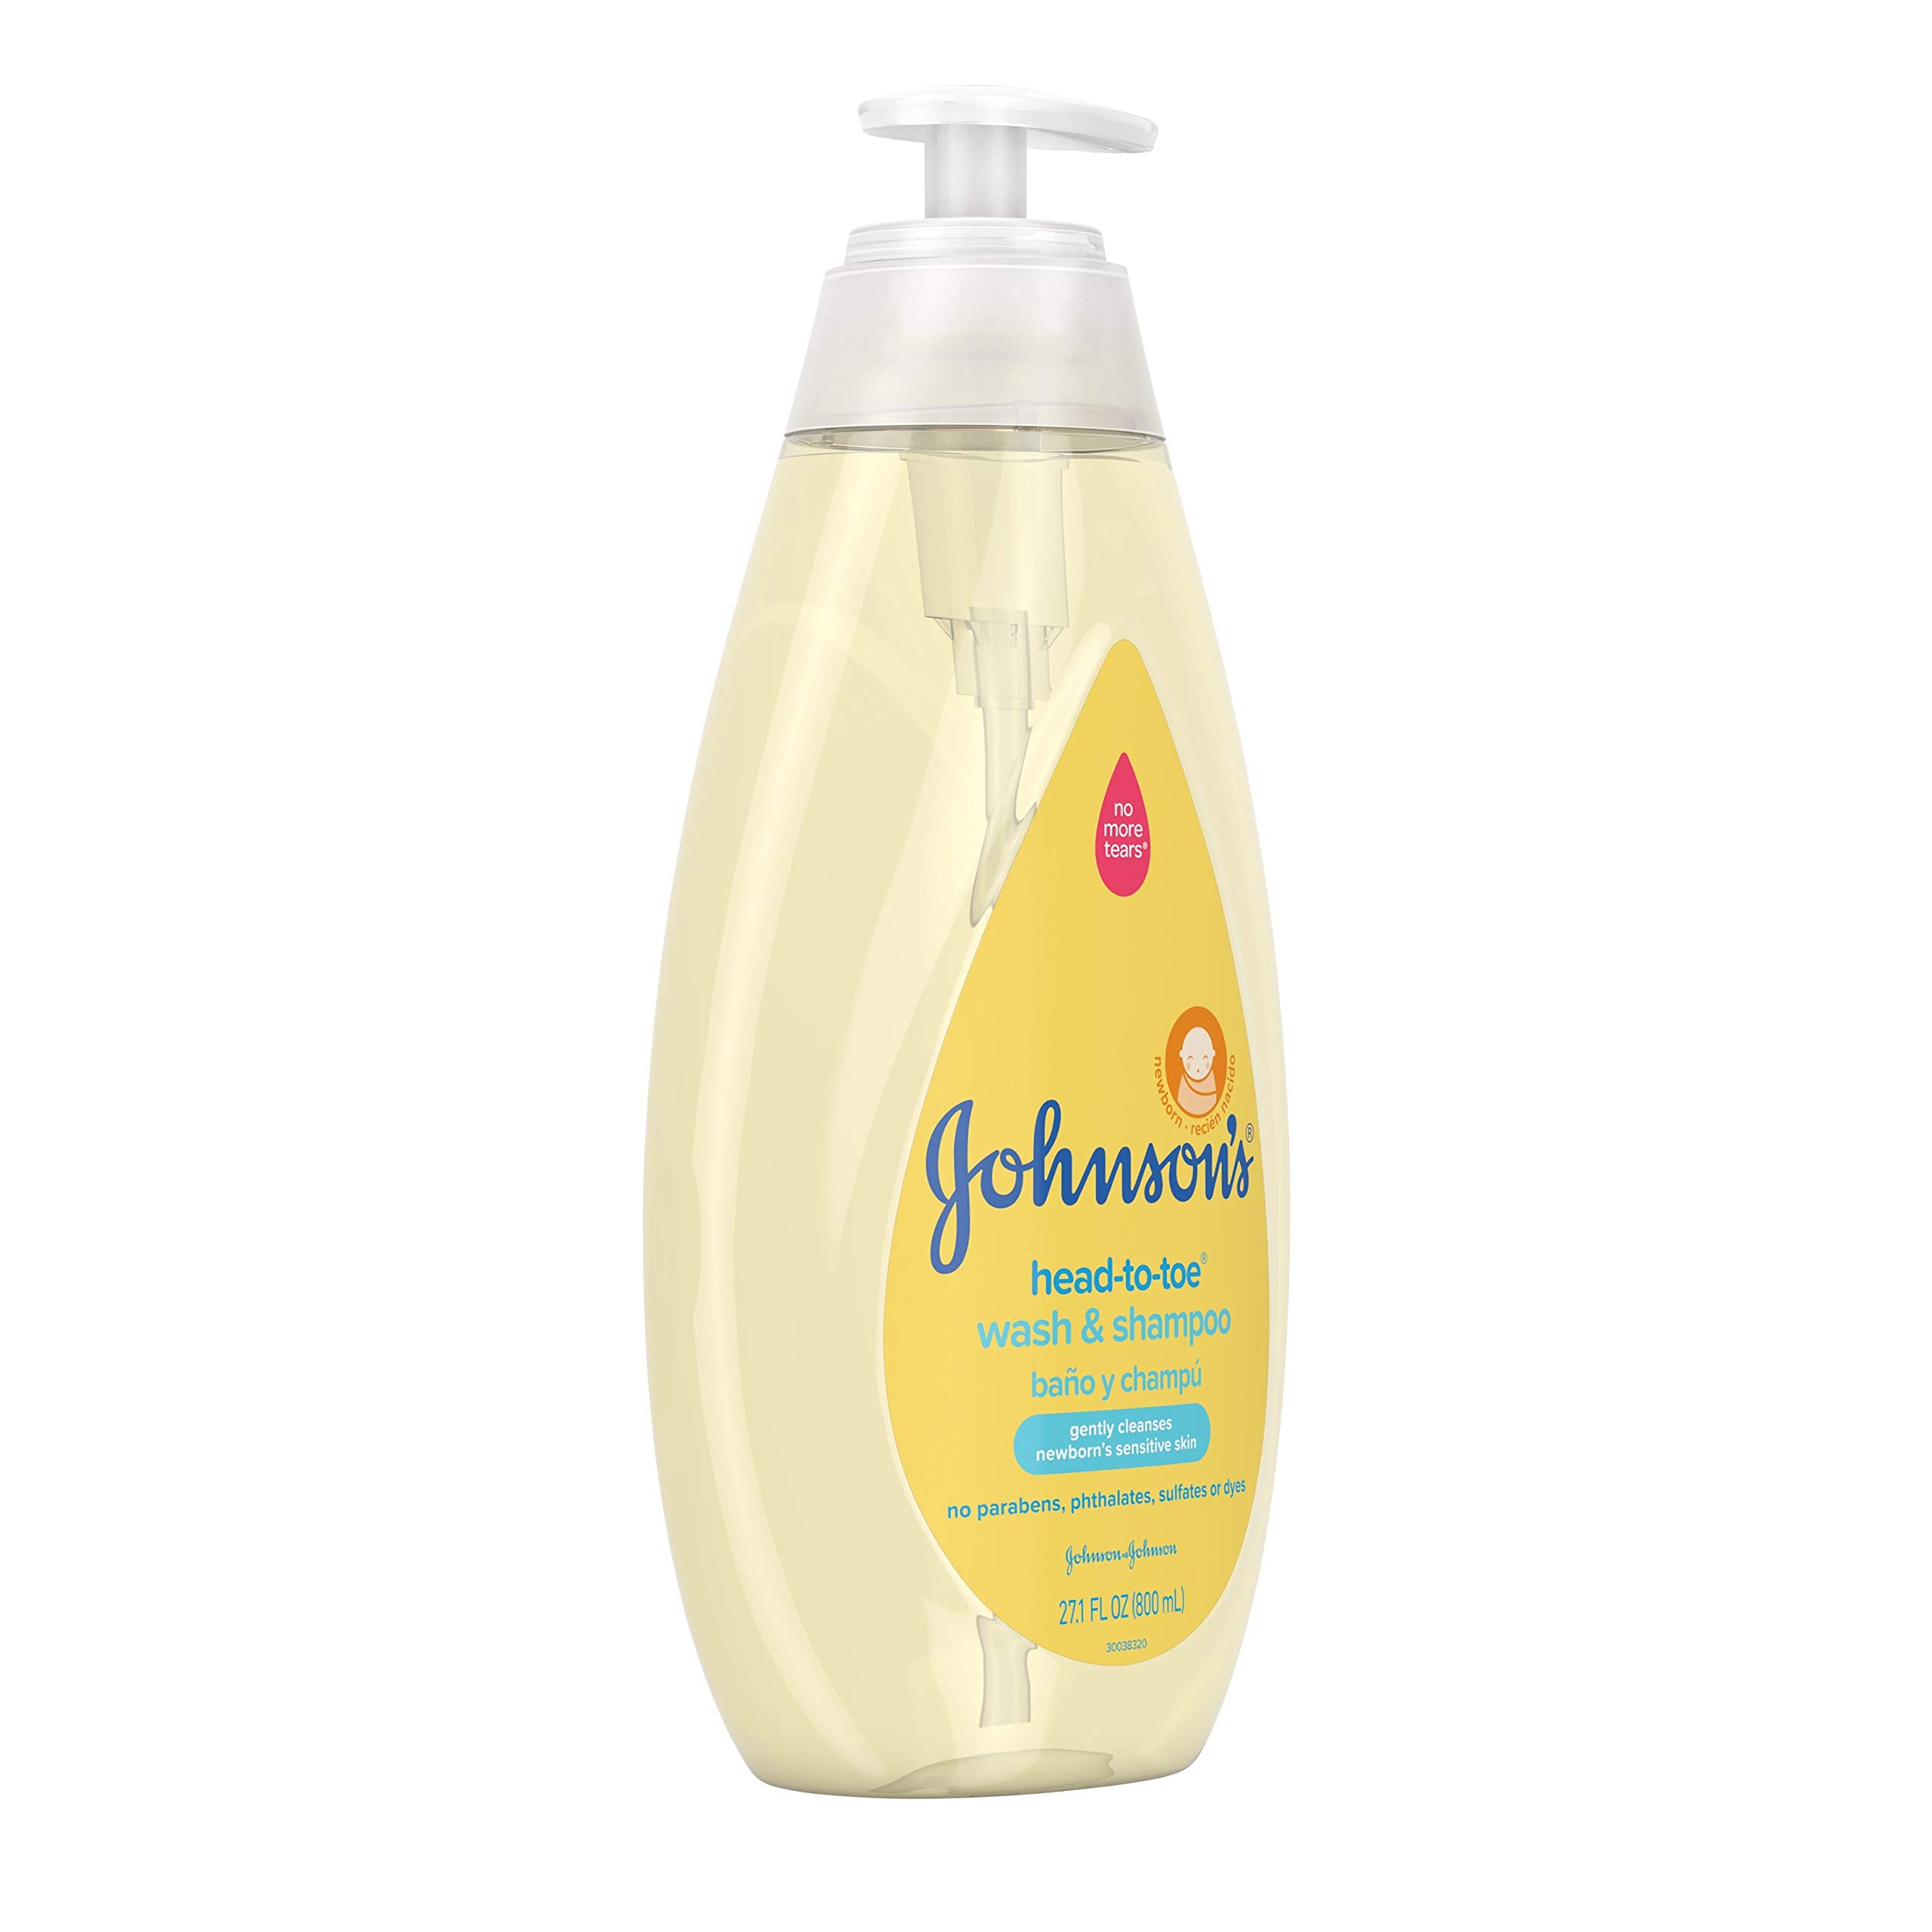 Johnson's Head-To-Toe Gentle Baby Body Wash & Shampoo, Tear-Free, Sulfate-Free & Hypoallergenic Bath Wash & Shampoo for Baby's Sensitive Skin & Hair, Washes Away 99.9% Of Germs 27.1 fl. oz